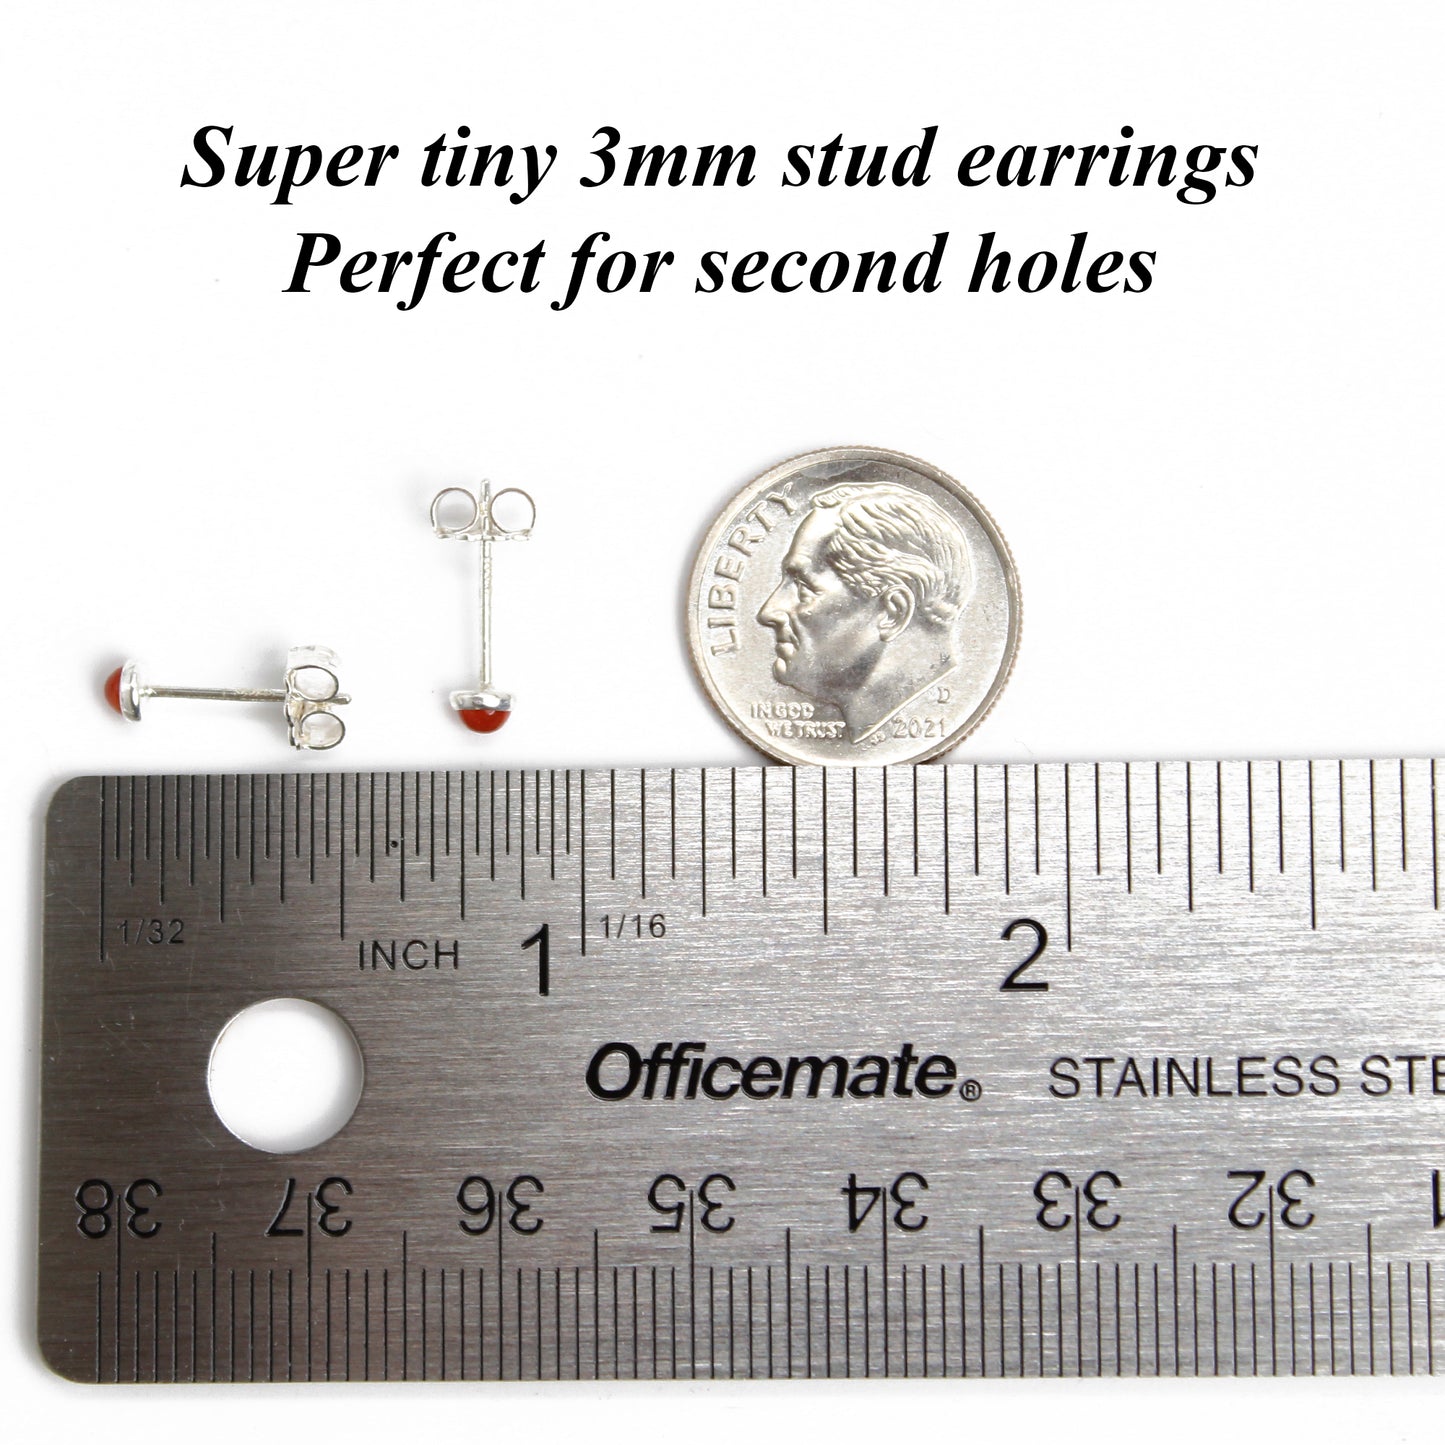 Tiny (3mm to 10mm) – Shells for Artists